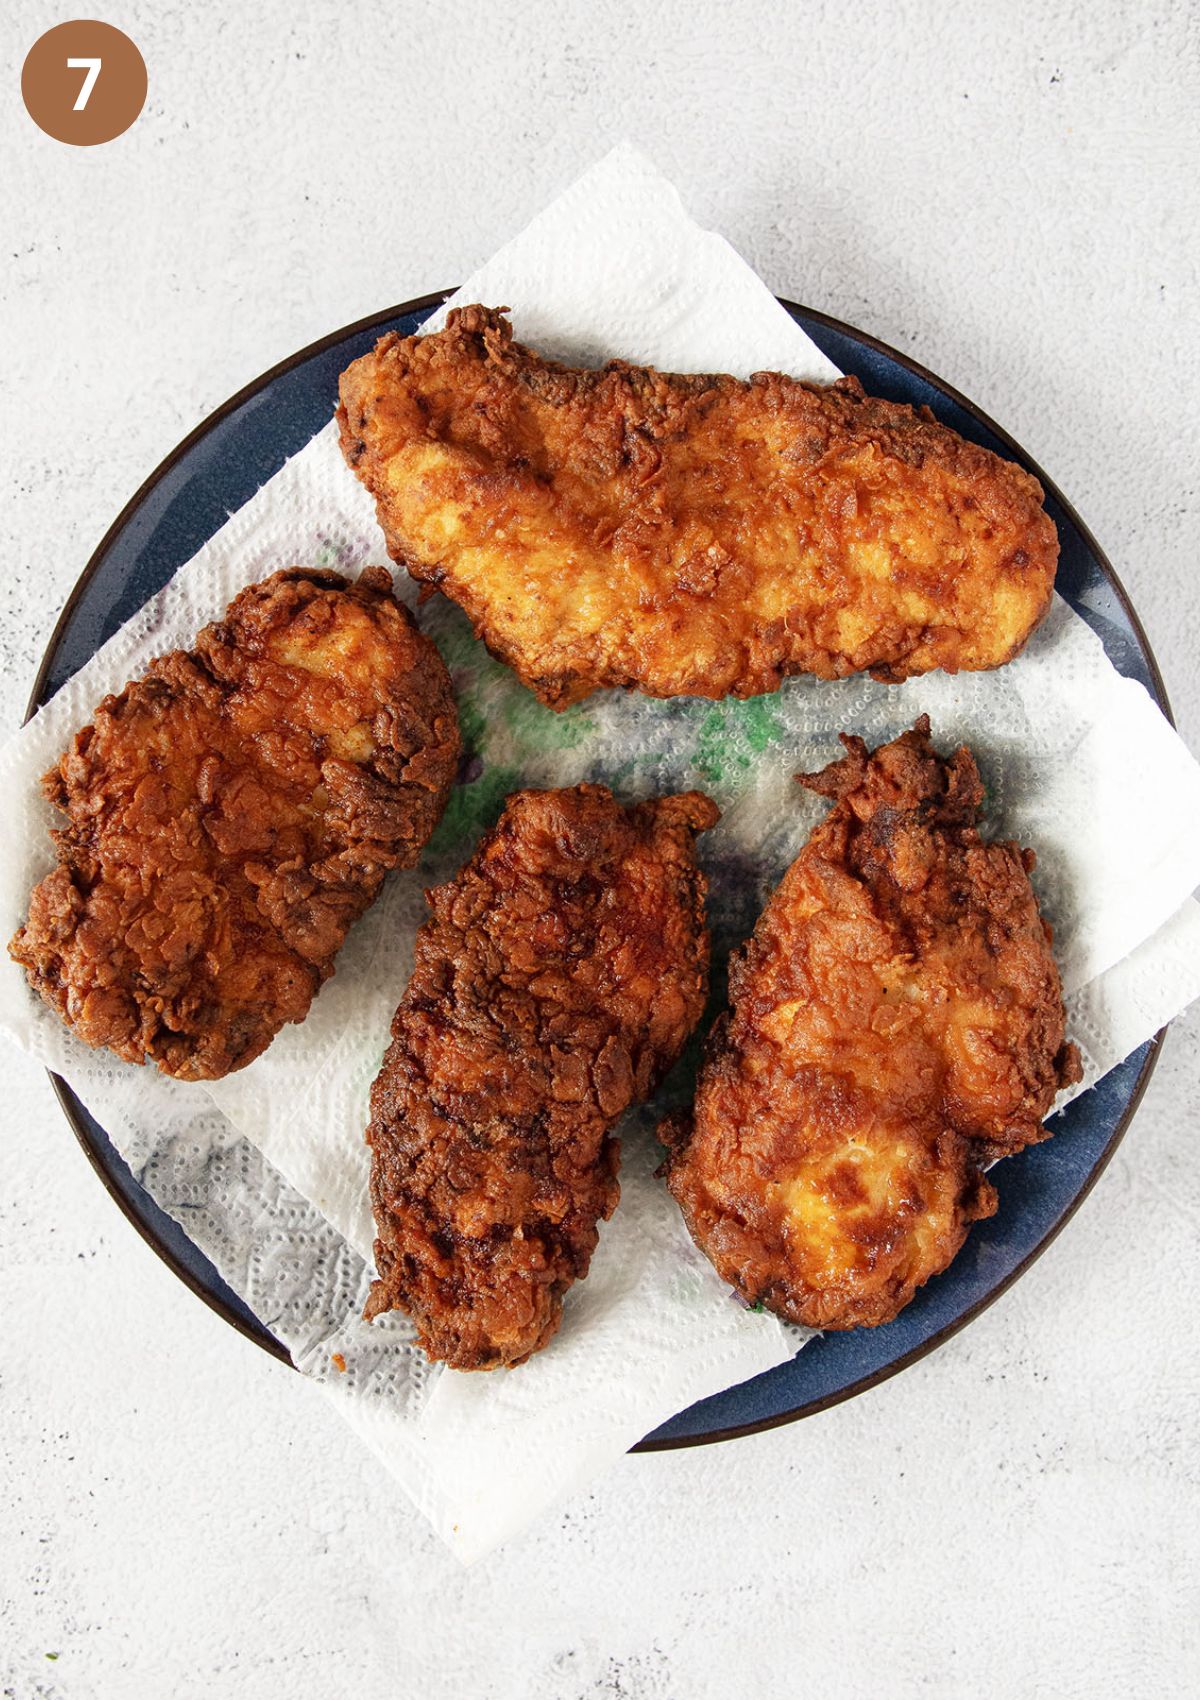 four pieces of fried chicken on a plate lined with paper to absorb the oil.